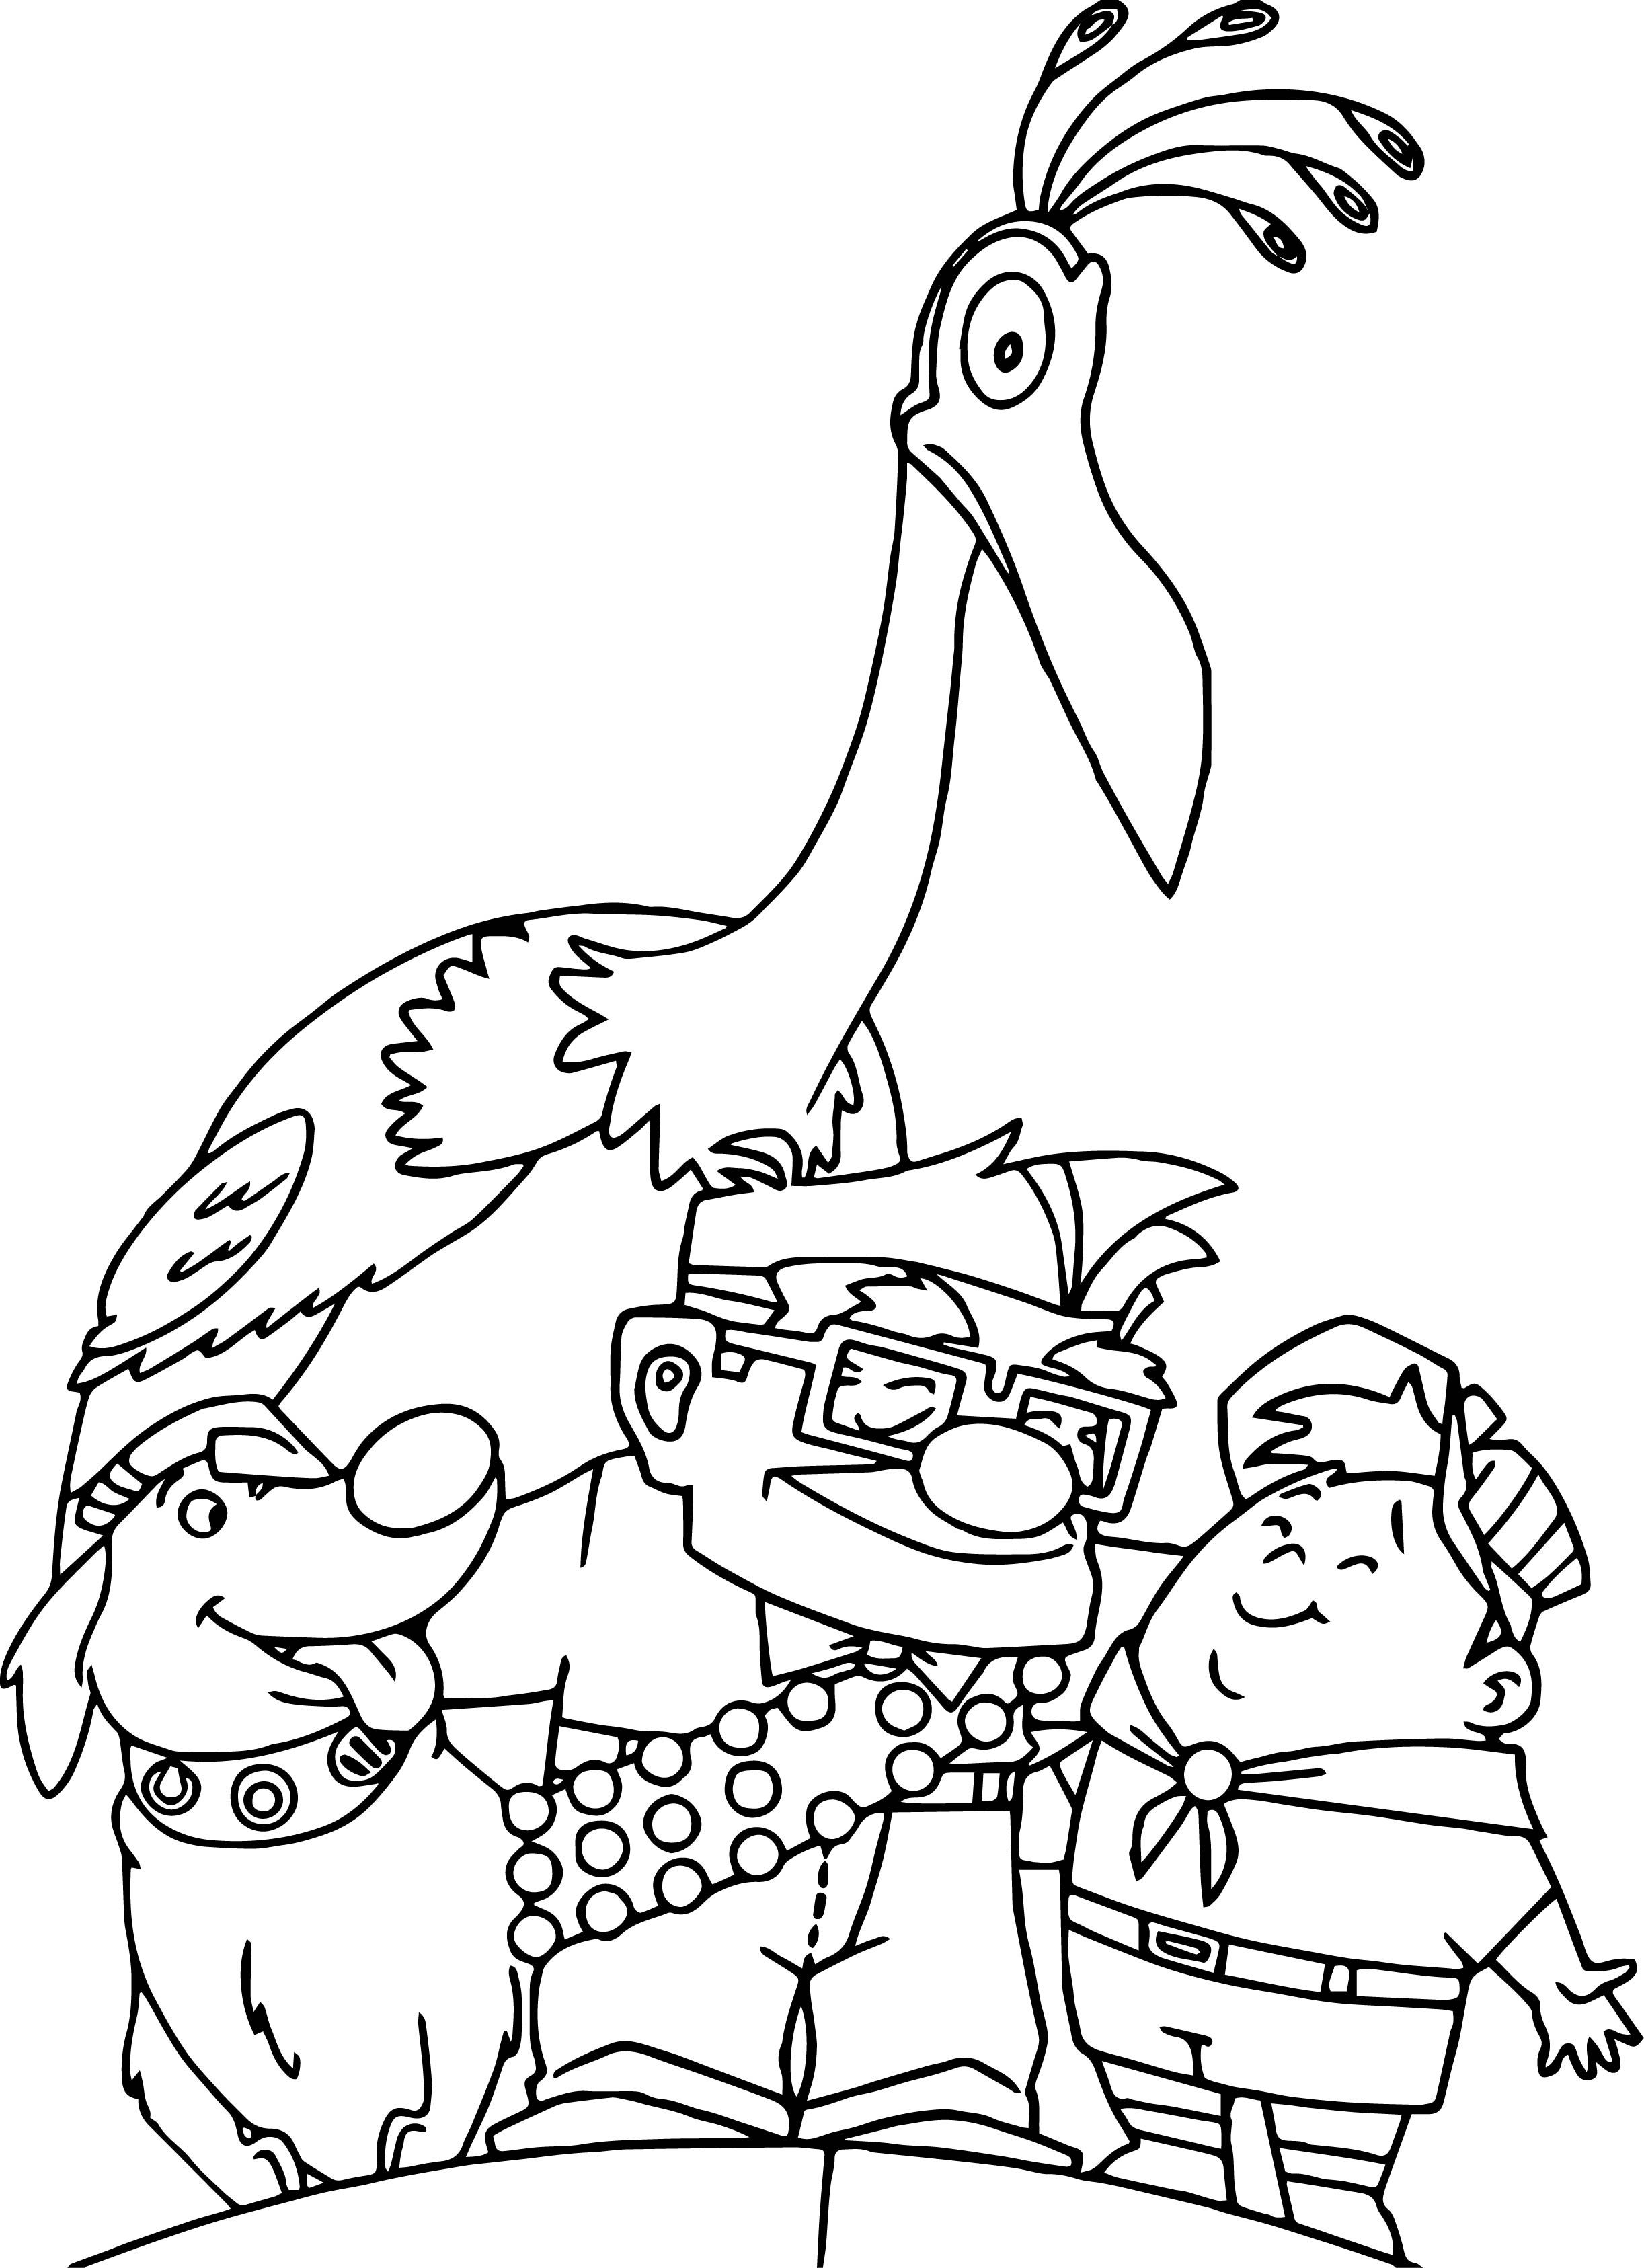 Pixar Up Coloring Pages